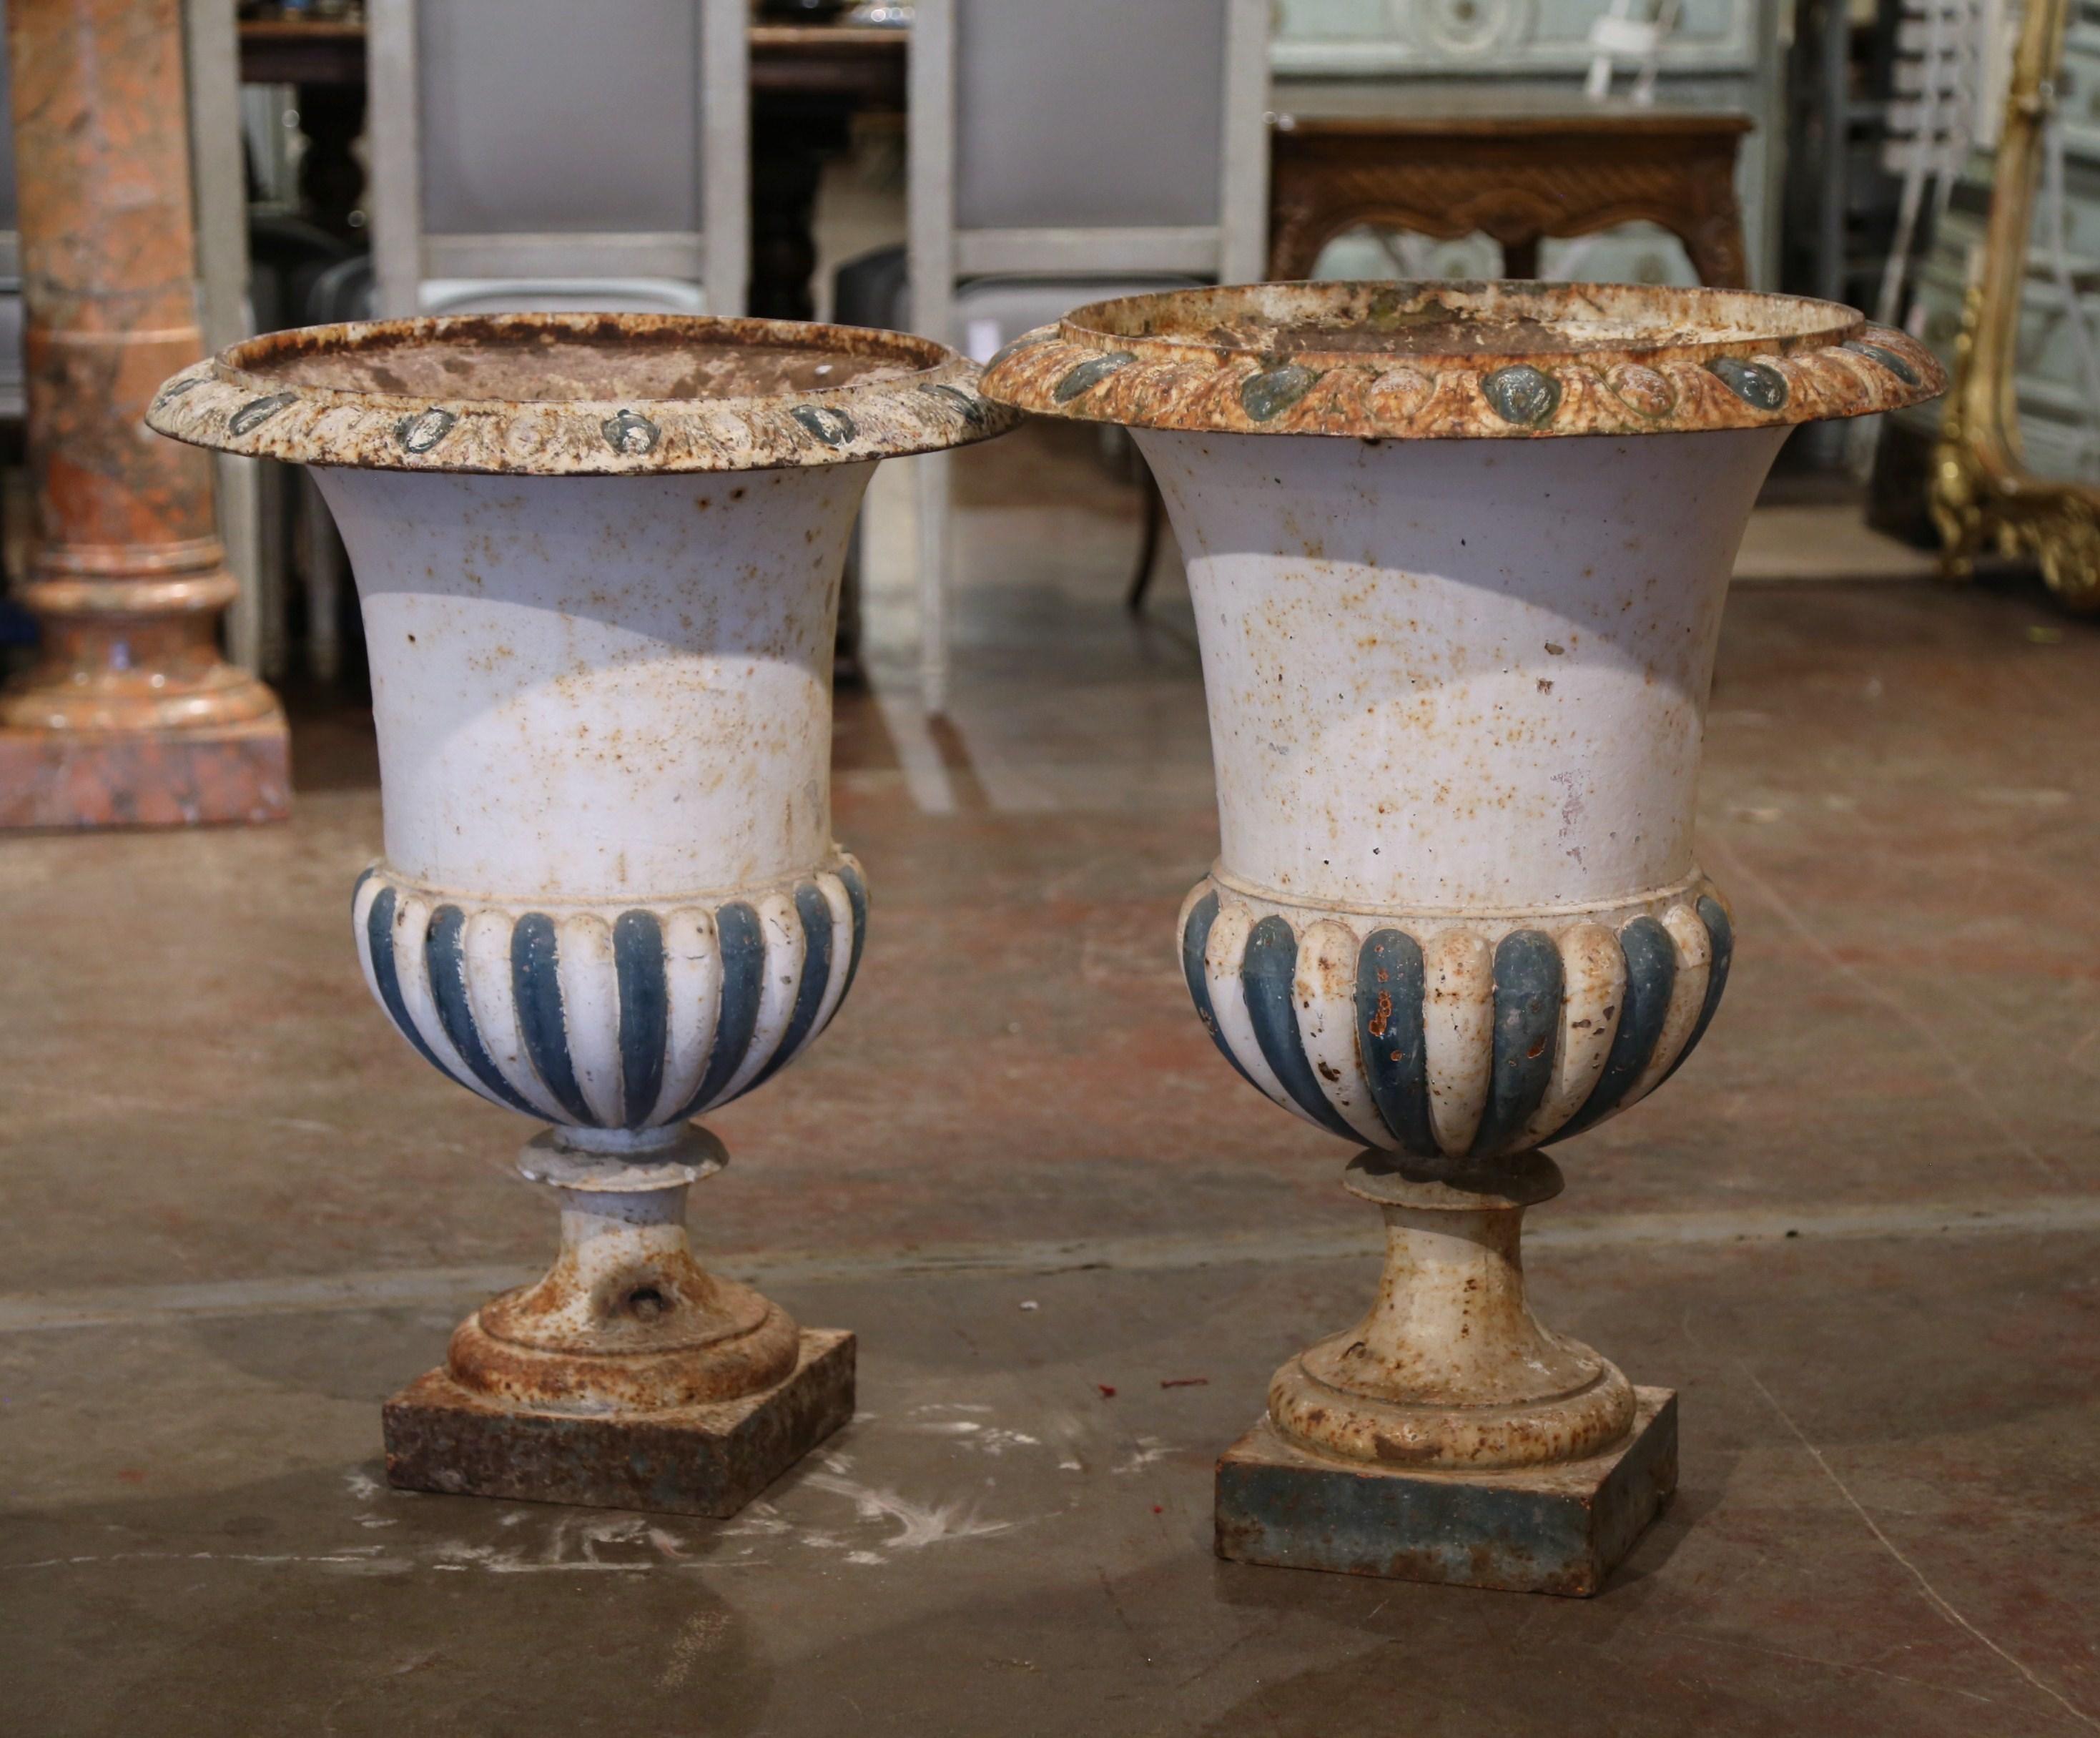 Place these large vases at your front or back door! Crafted in France circa 1850, the antique Campana form urns stand on a square base with a wide mouth at the top, and feature the original painted and weathered finish. The tall Medici planters are